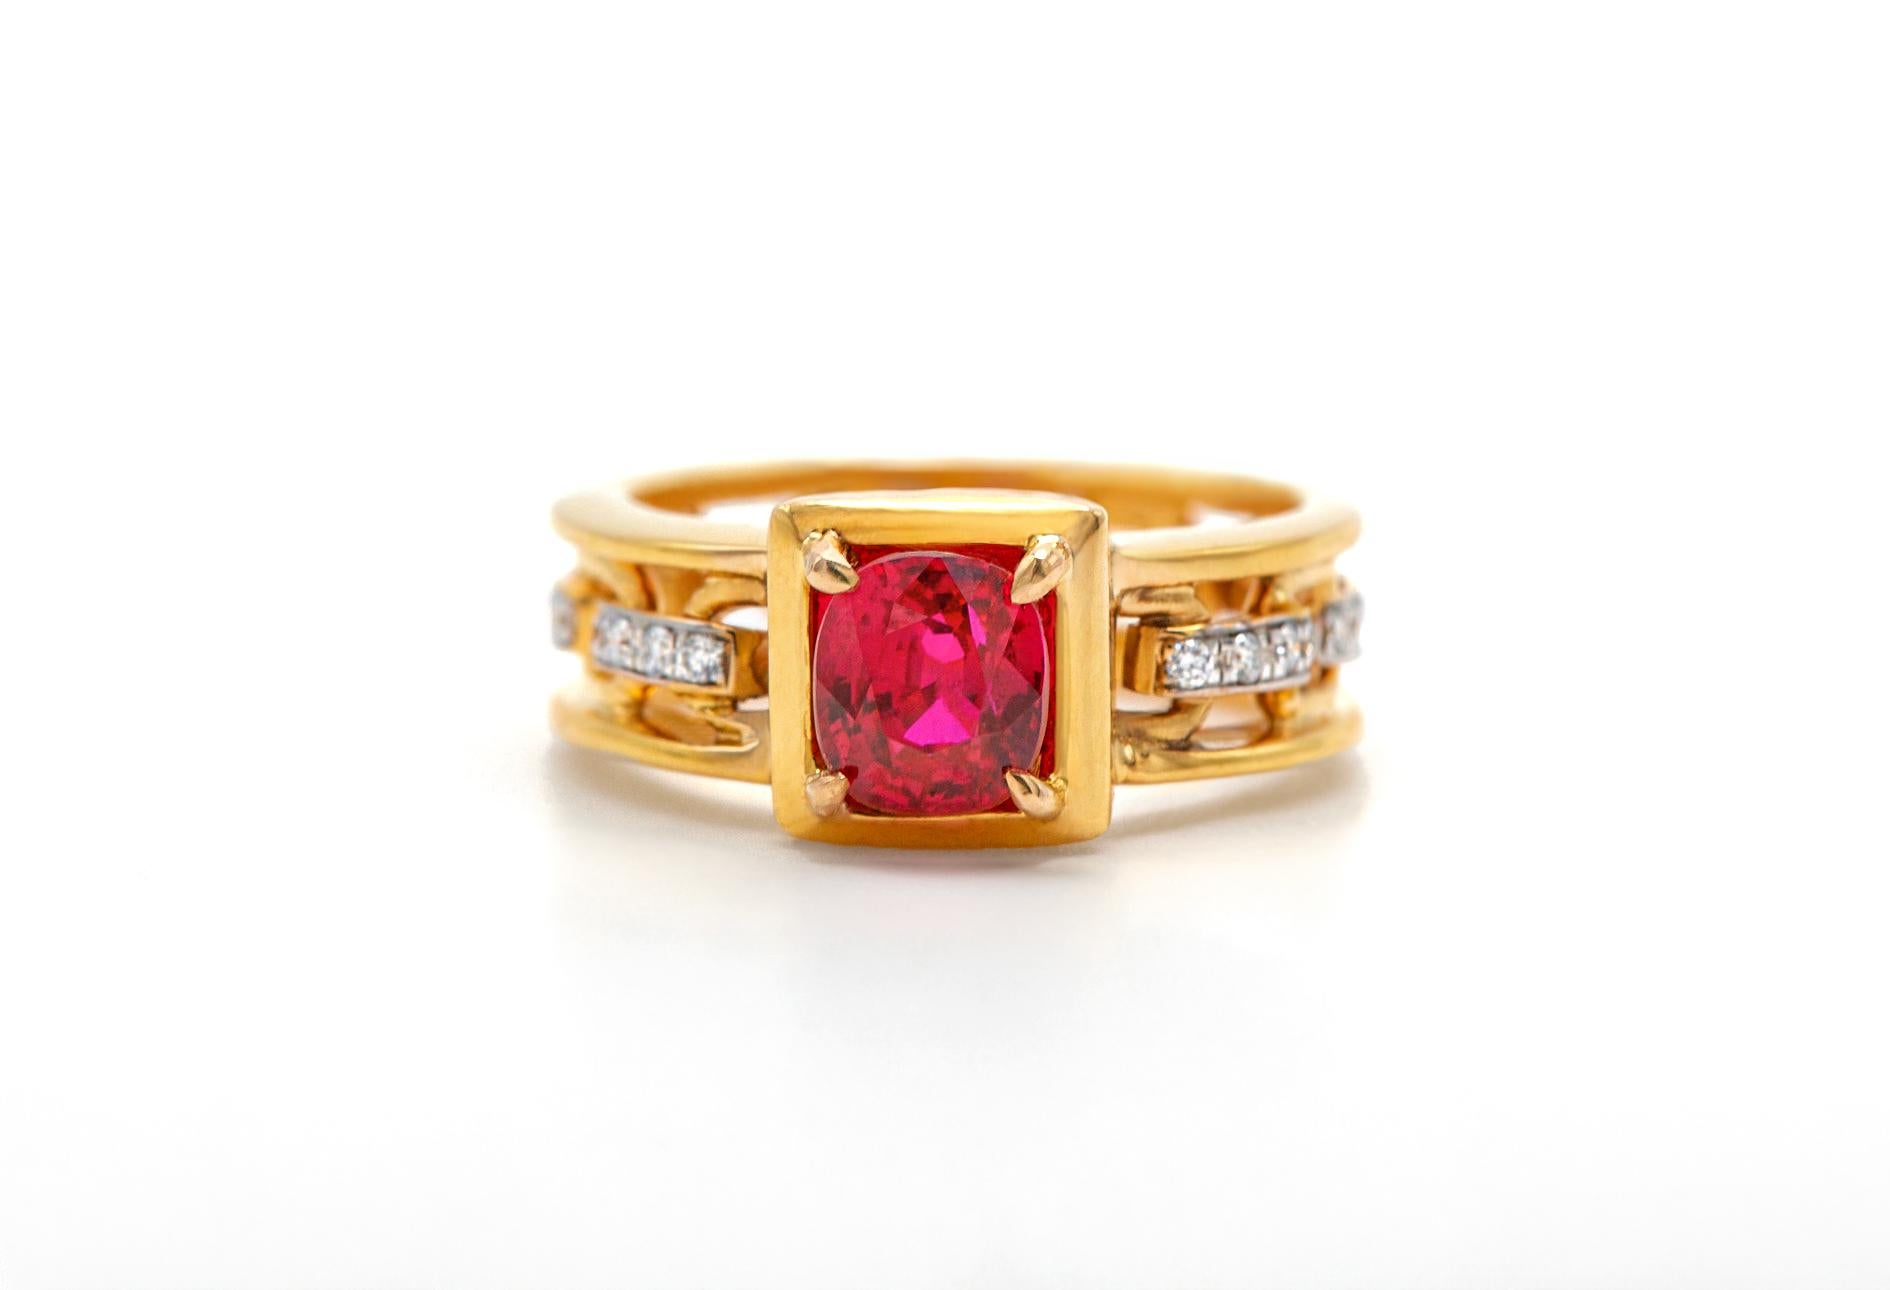 18K YELLOW GOLD 
16 DIAMONDS   0.13 CARATS
1 NO-HEAT BURMESE RUBY  2.06 CARATS
GUBELIN LAB CERTIFIED  RED

This exquisite ring combines the timeless allure of a classic chain with the extraordinary red hue of a Burmese ruby. With understated